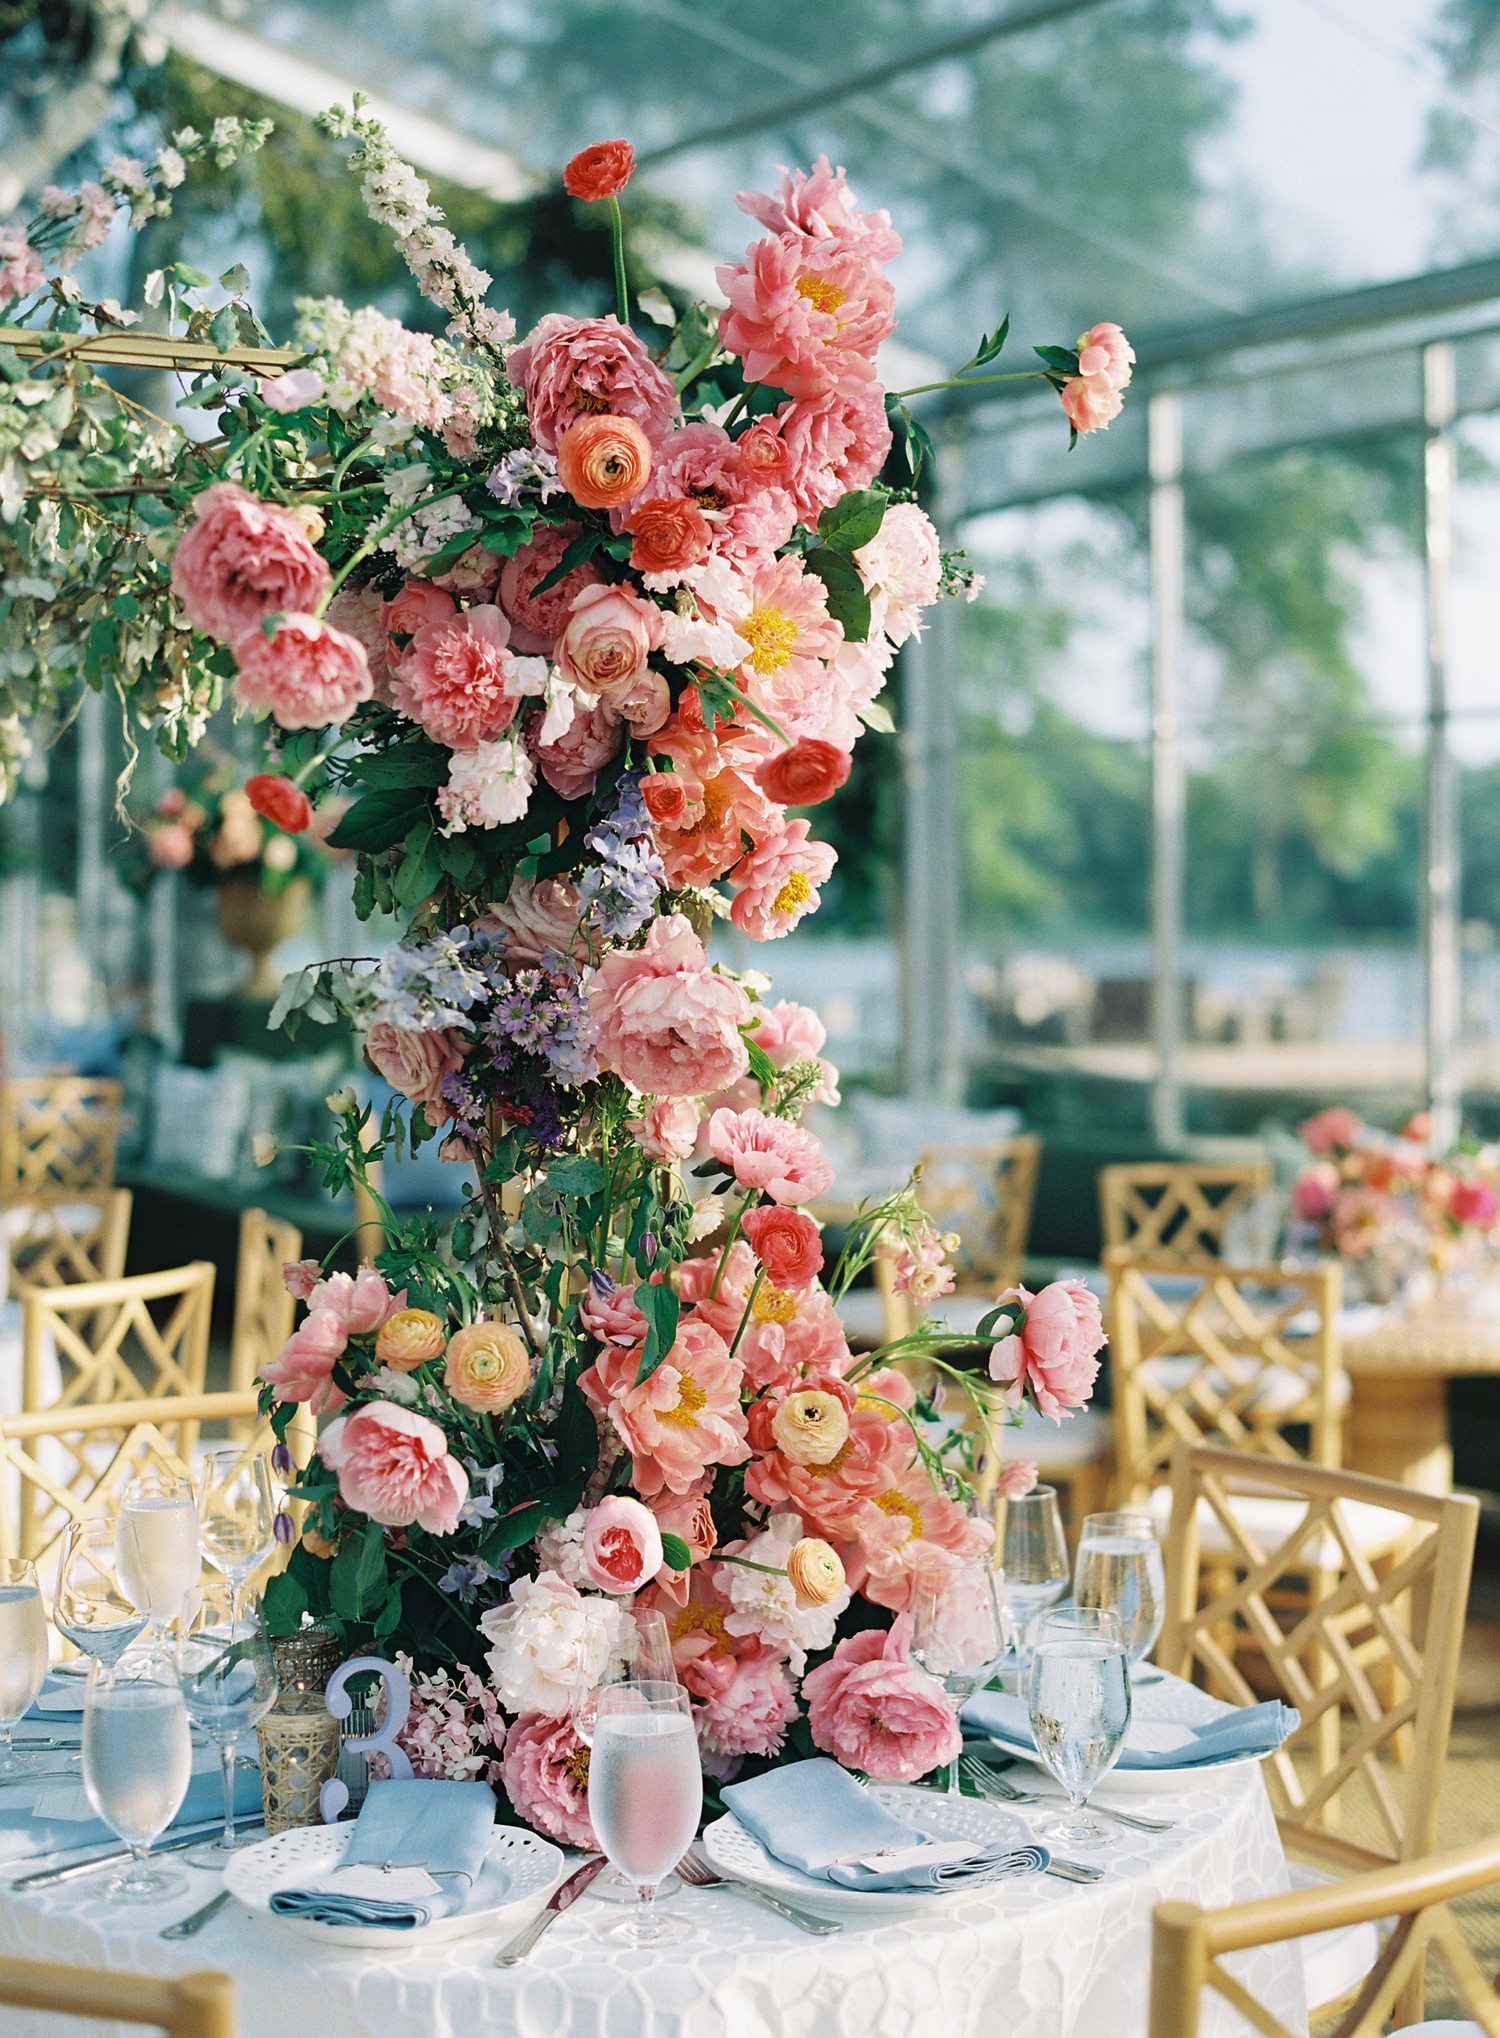 Tower of flowers on table at wedding reception. 